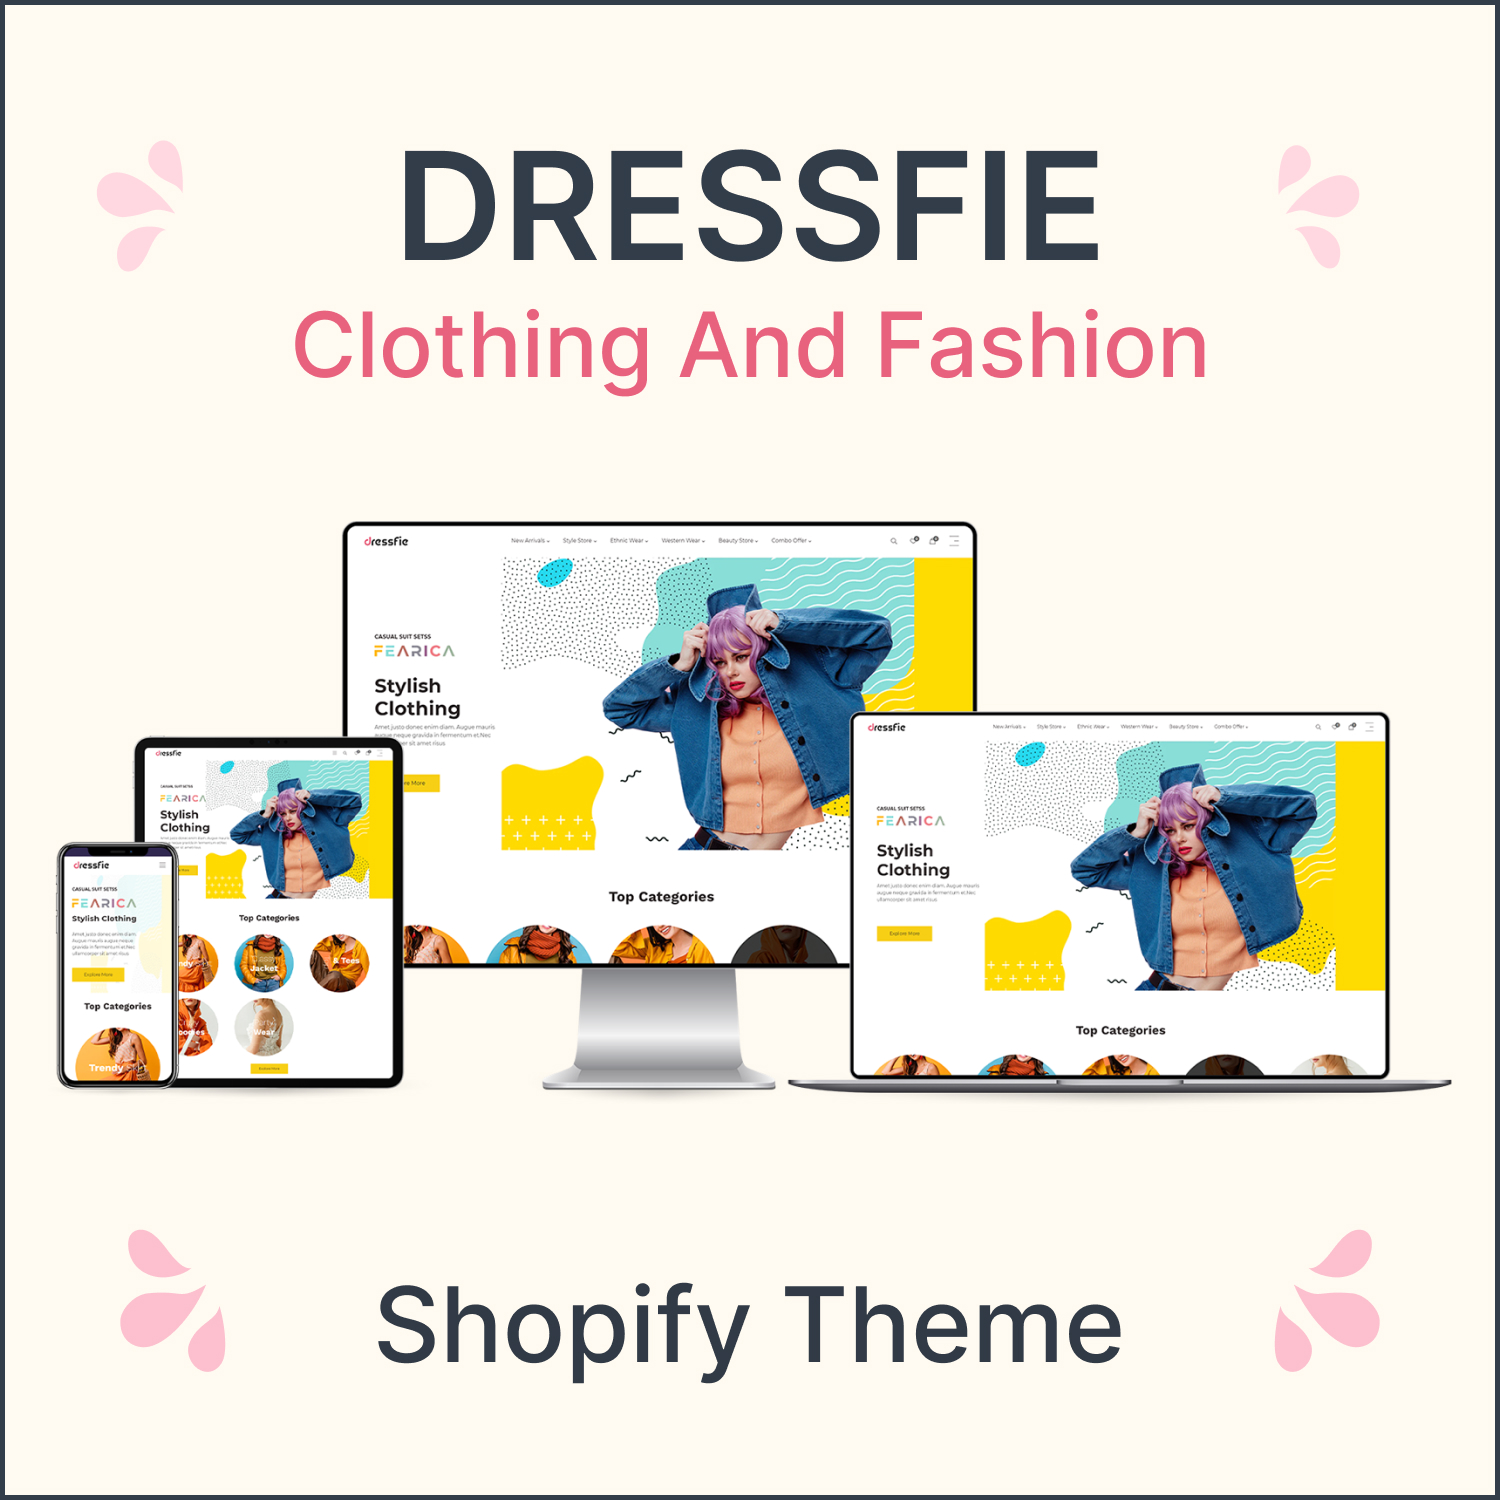 Preview images dressfie clothing and fashion shopify theme.